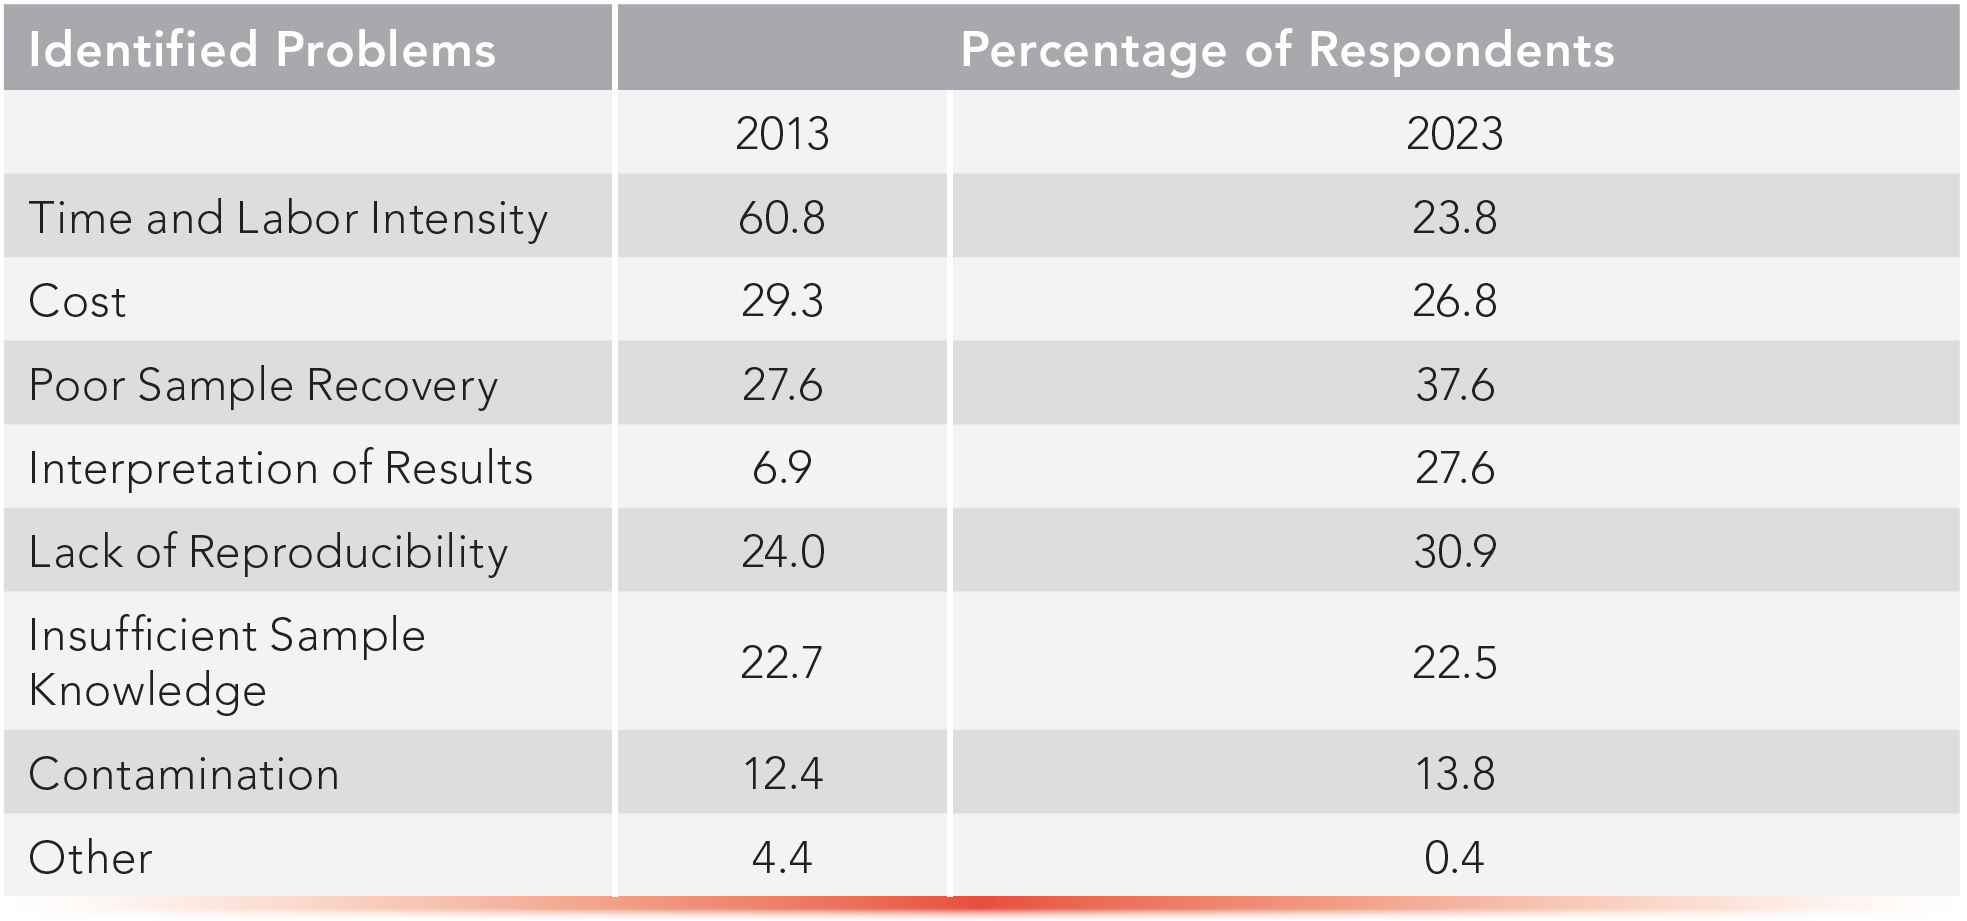 TABLE II: Most Frequently Identified Problems with Sample Preparation in the 2013 and 2023 Surveys.